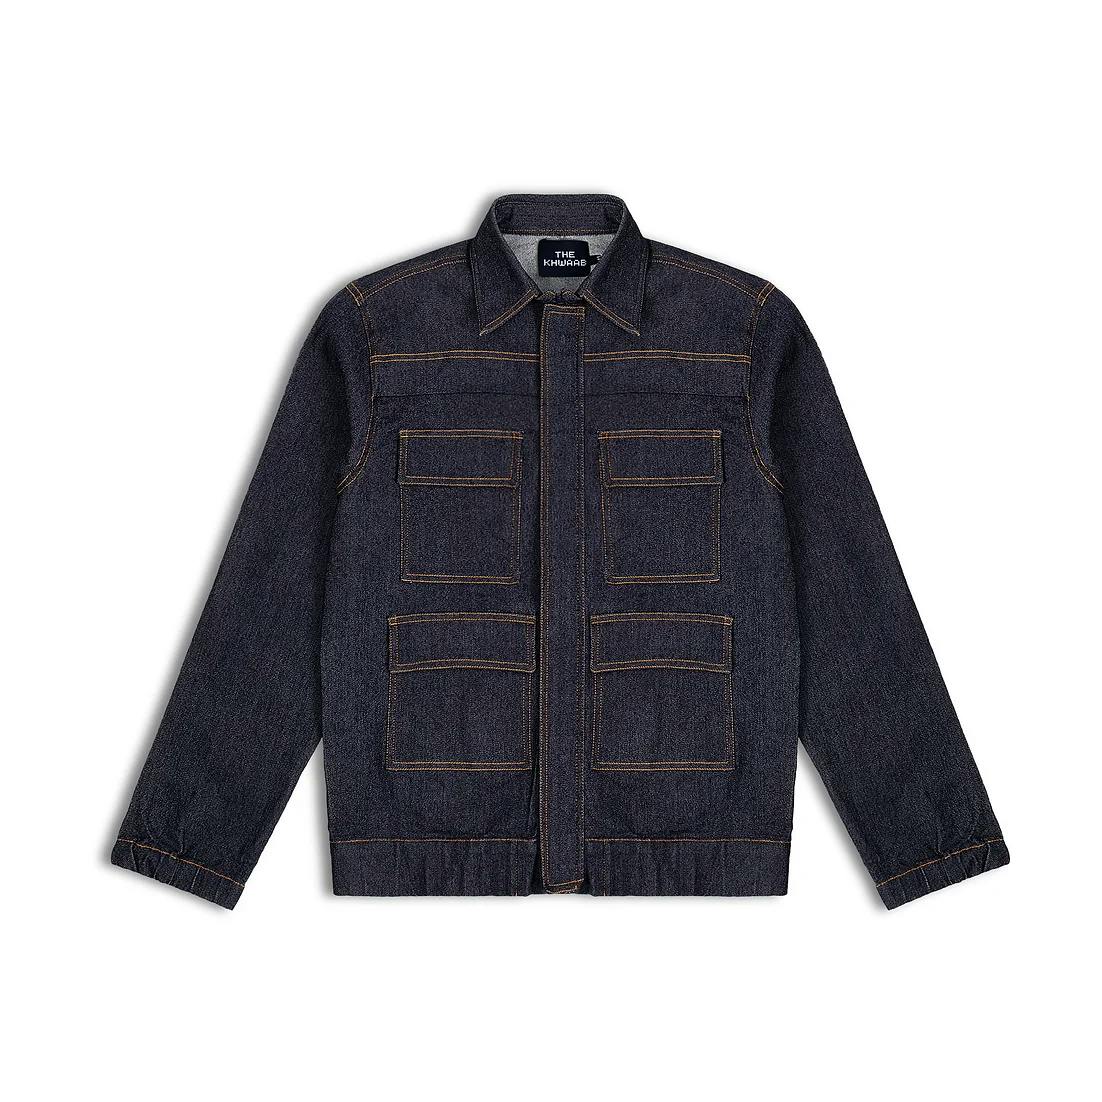 Denim Utility Jacket, a product by The Khwaab